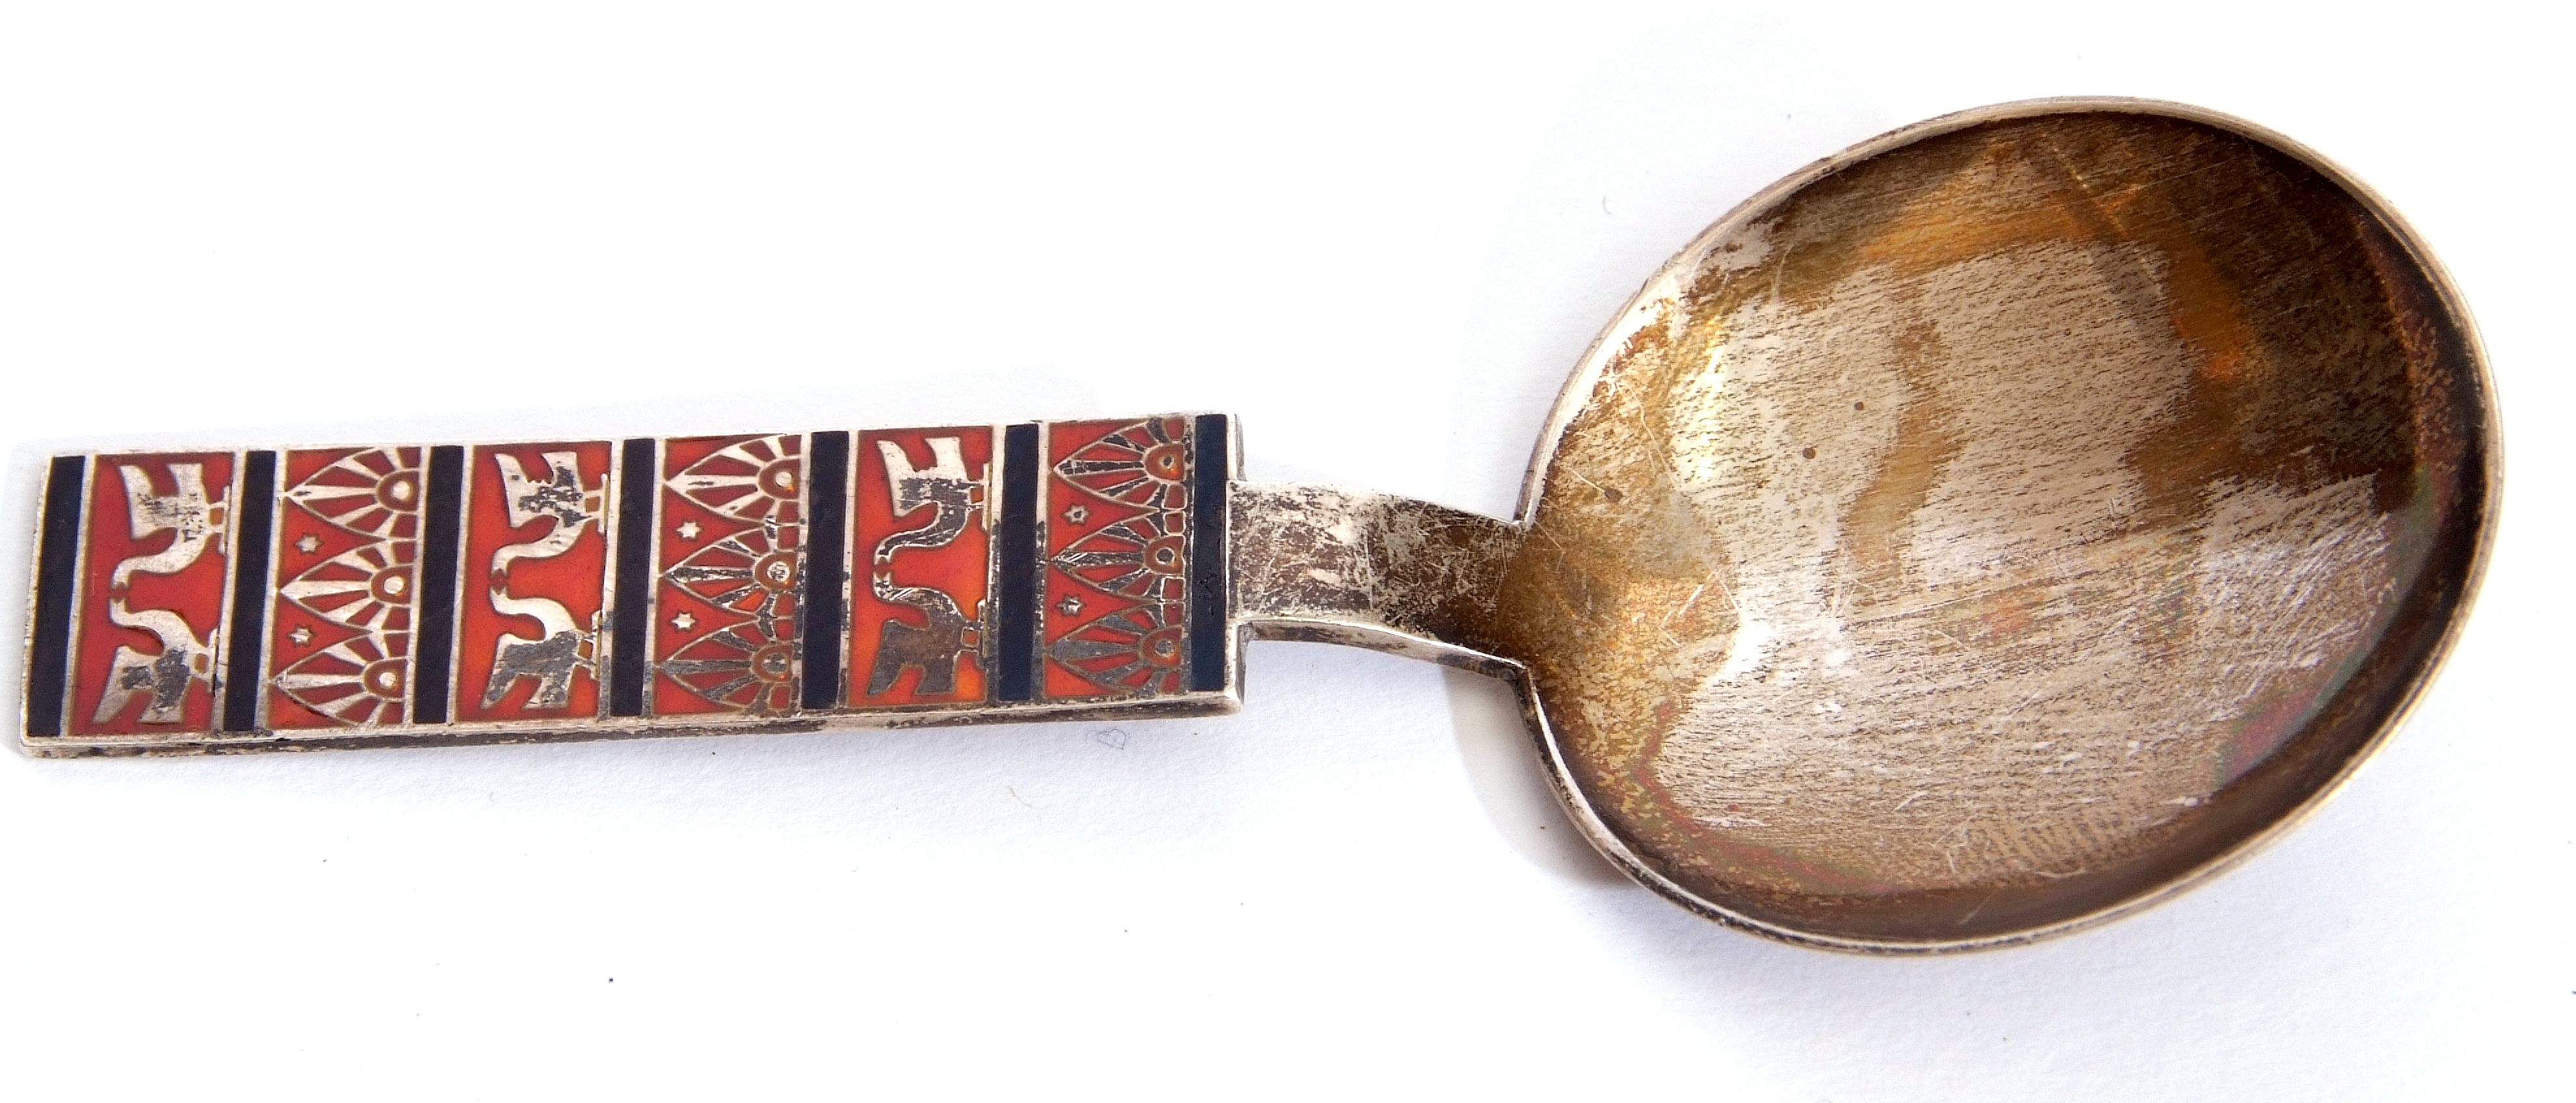 Late 20th century Russian white metal and enamelled small caddy spoon with circular bowl, the